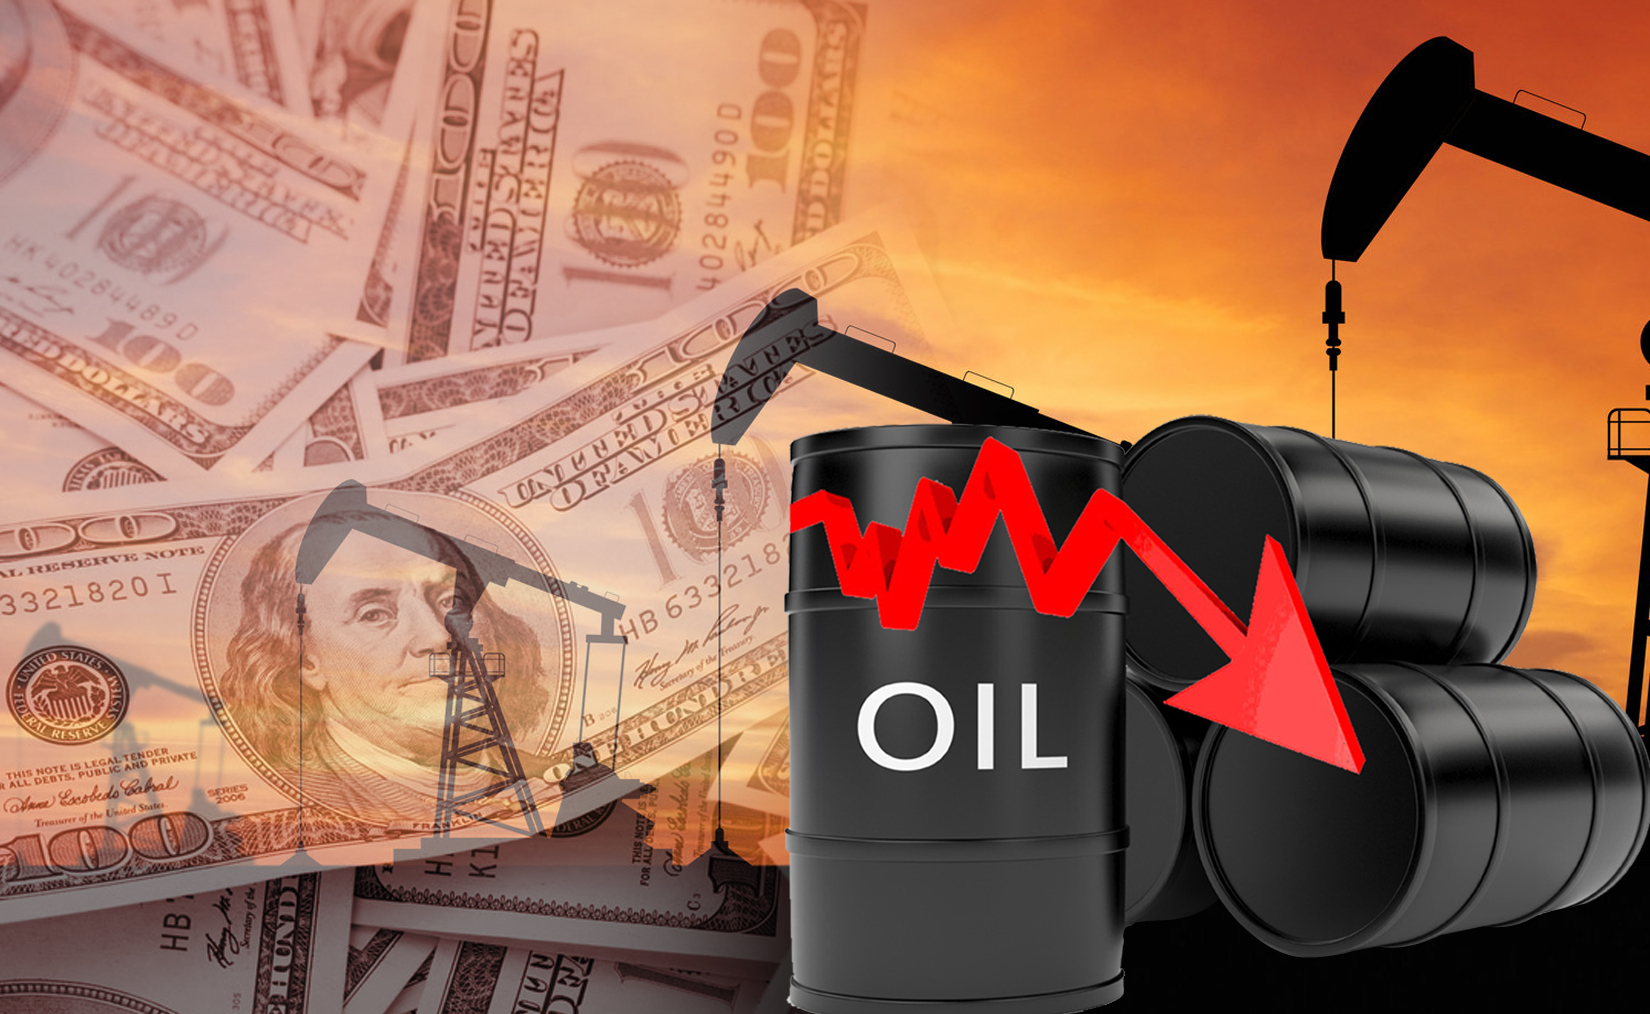 Kuwait oil price drops but remains well above USD 30 pb ceiling                                                                                                                                                                                           